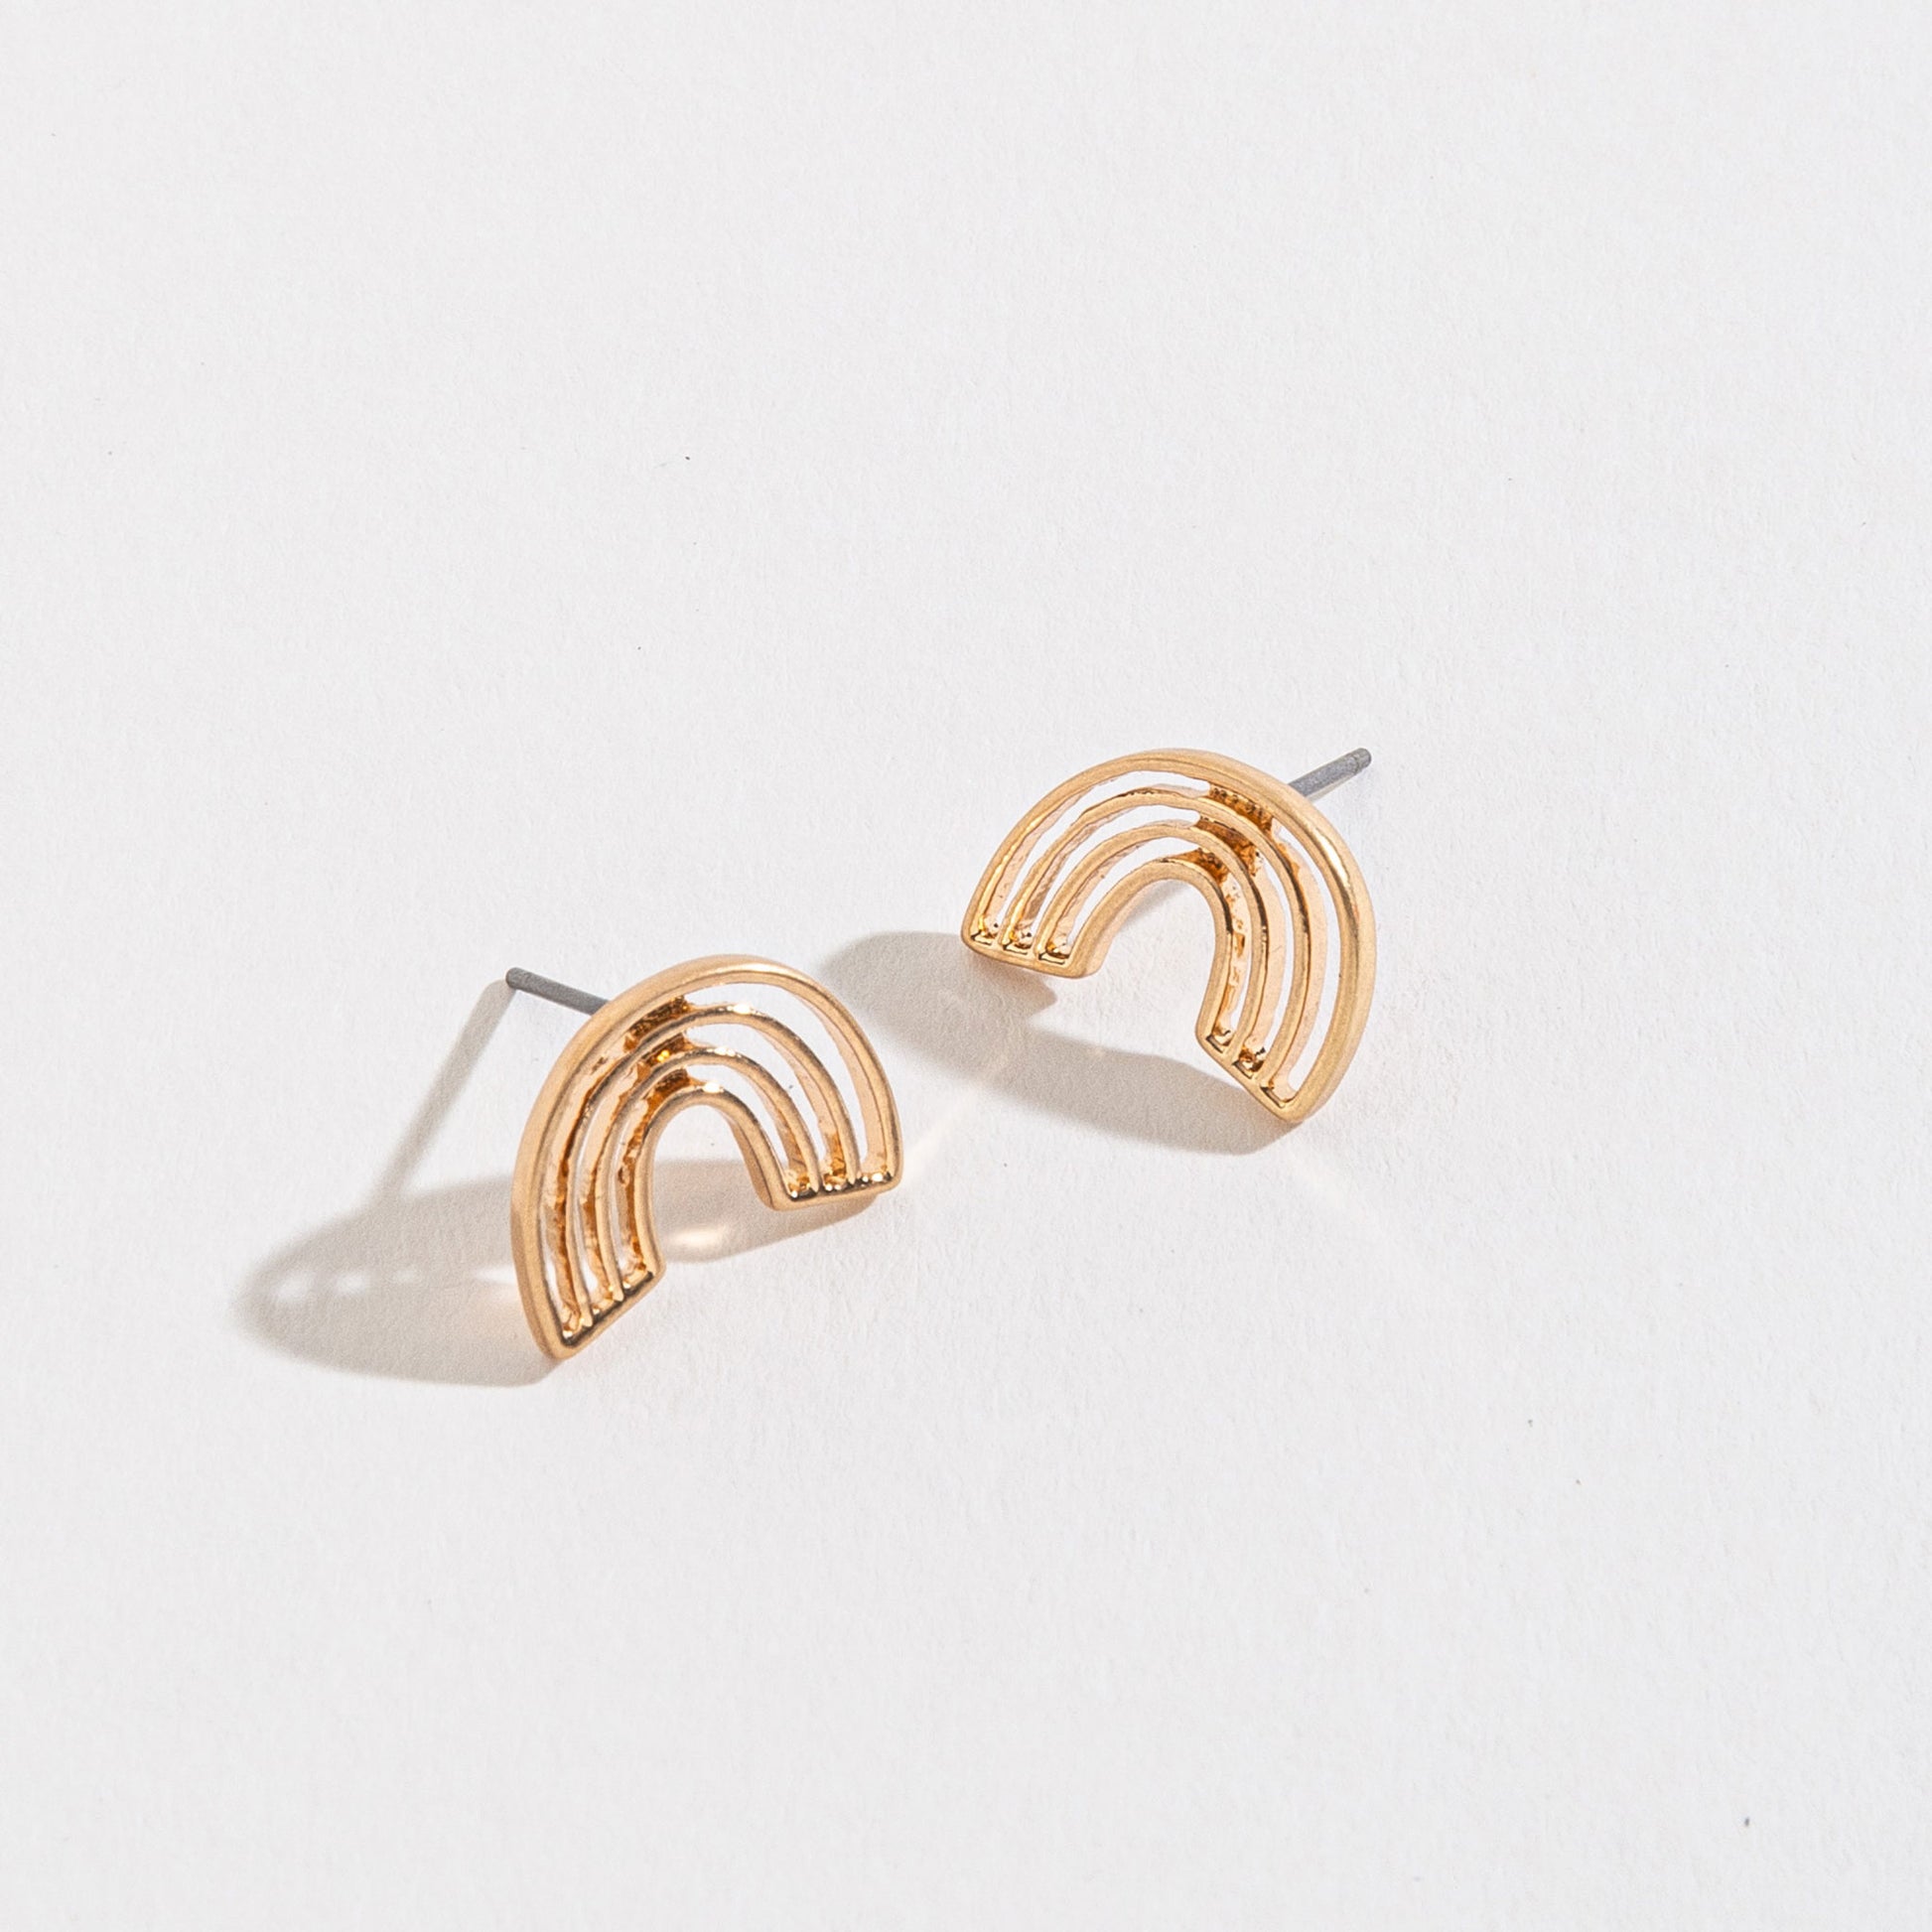 gold rainbow stud earrings on a white background